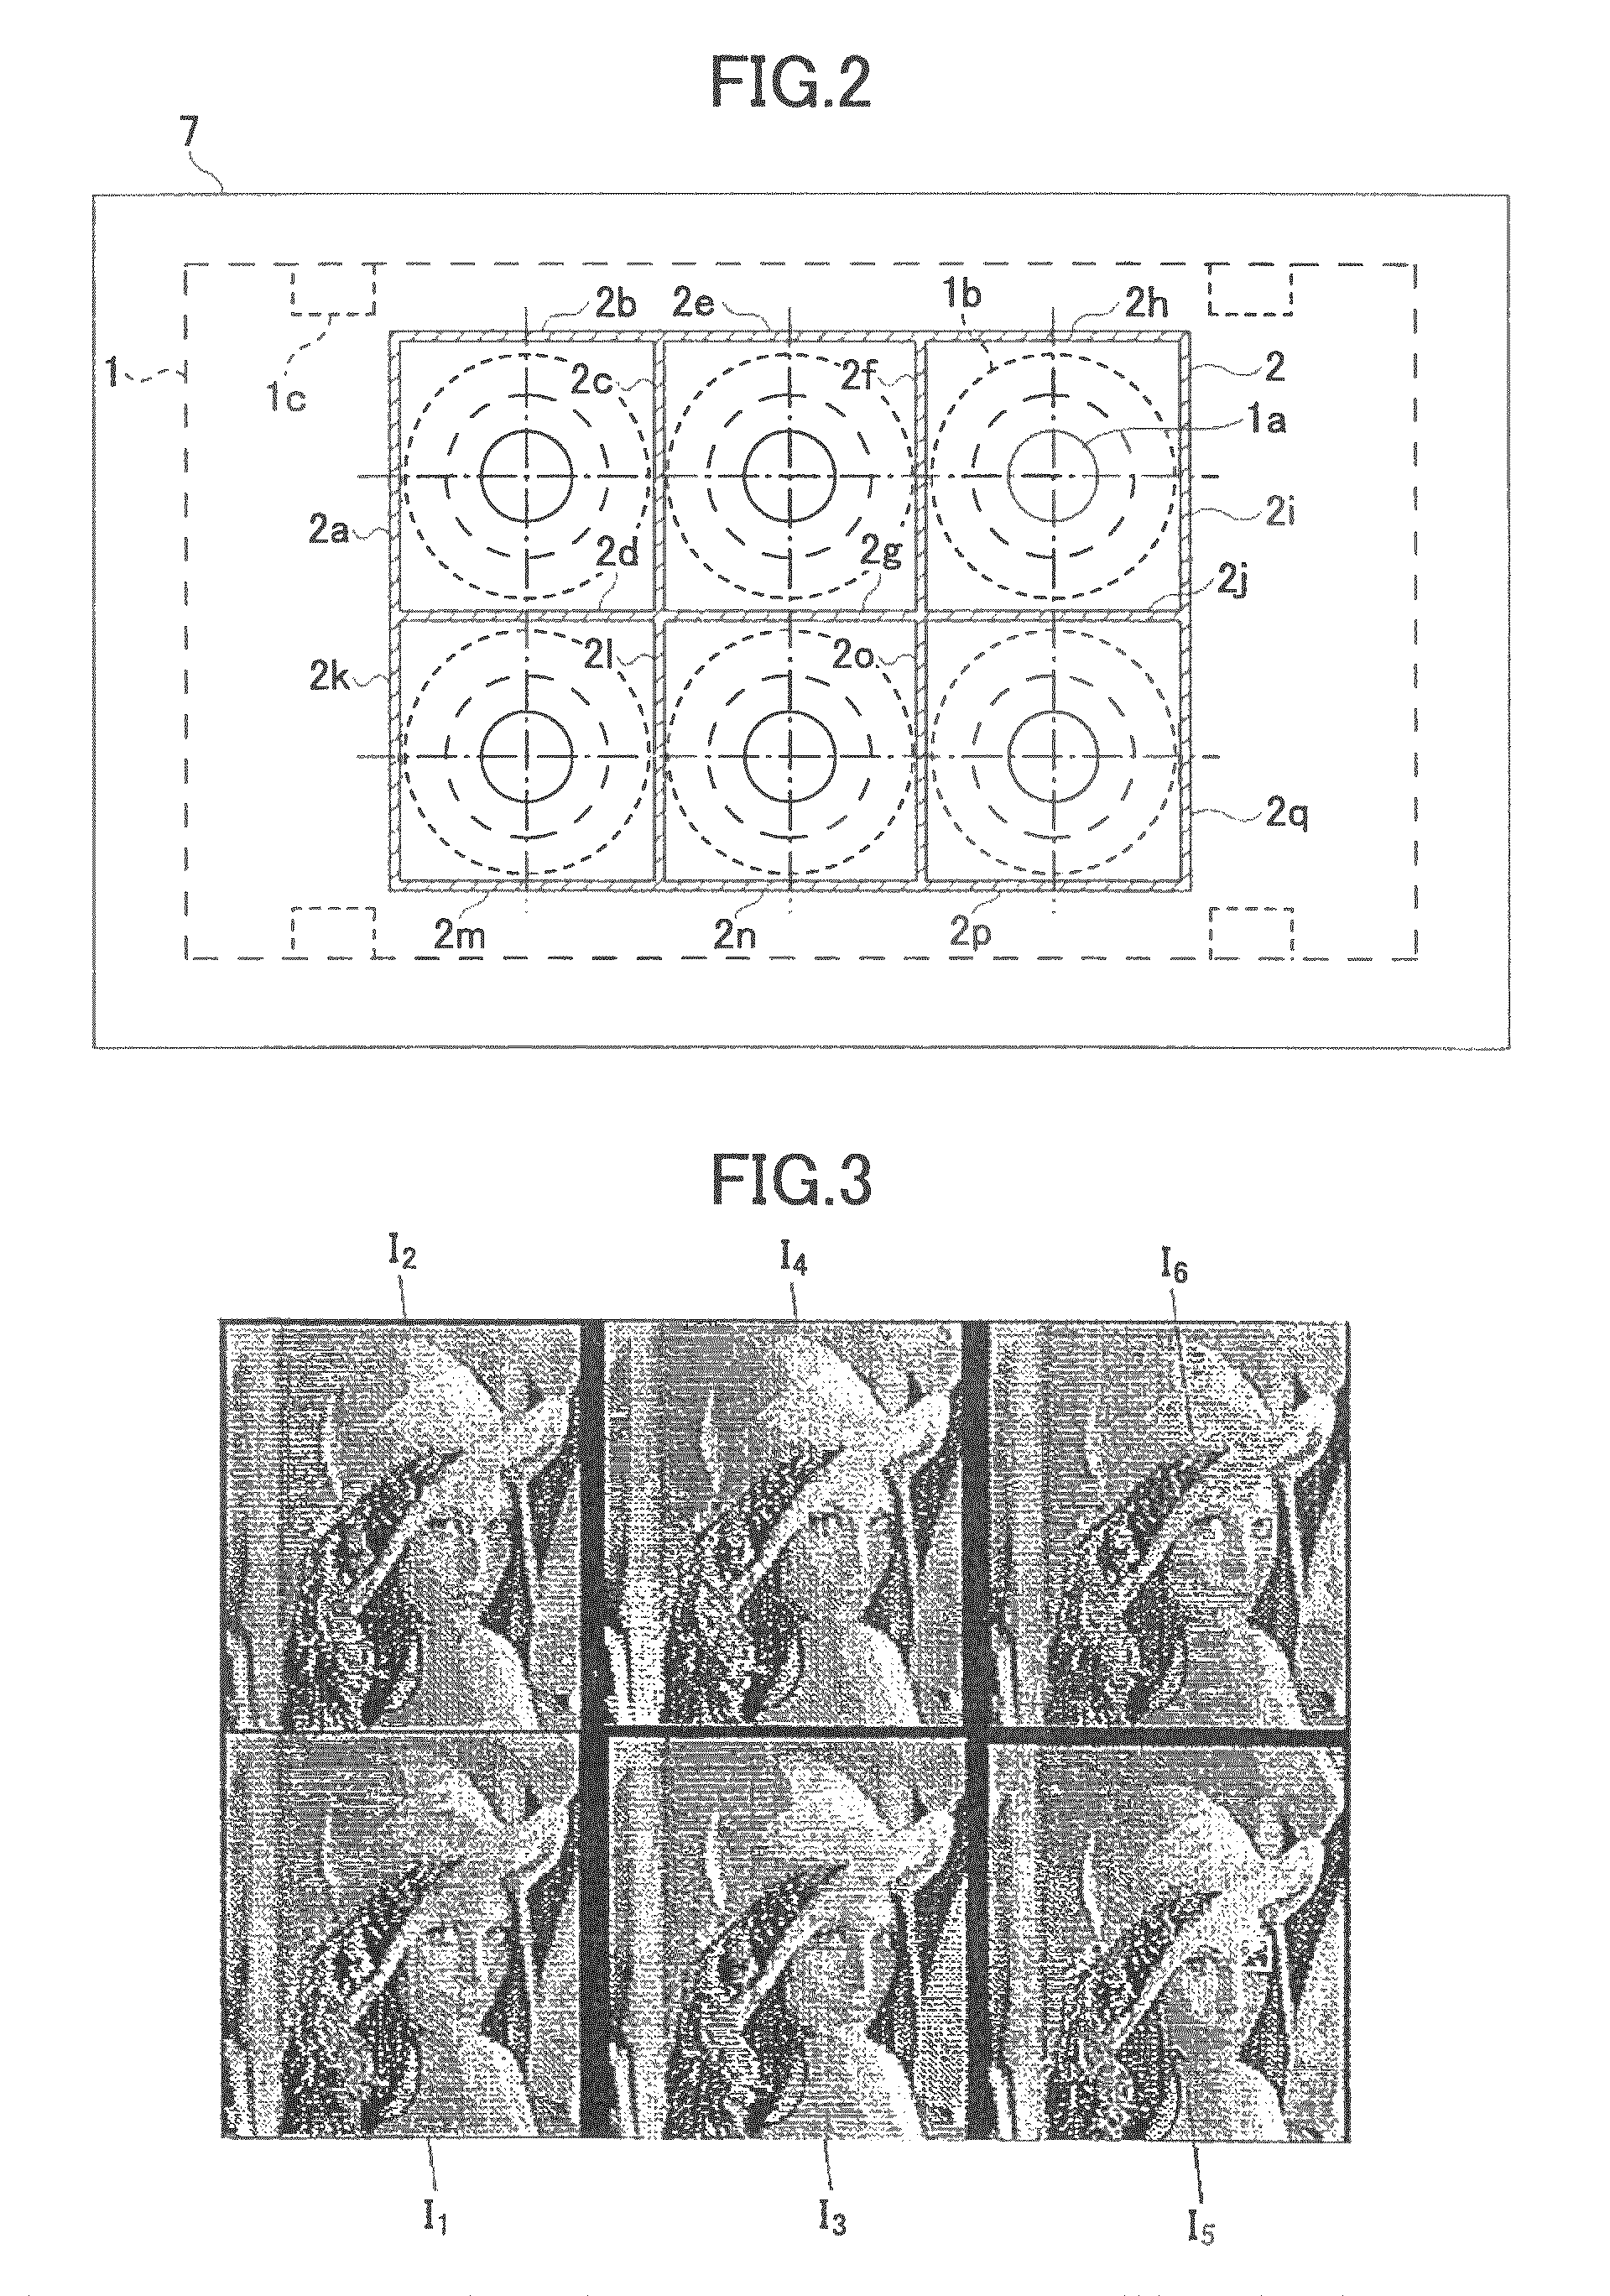 Image pickup apparatus with calibration function